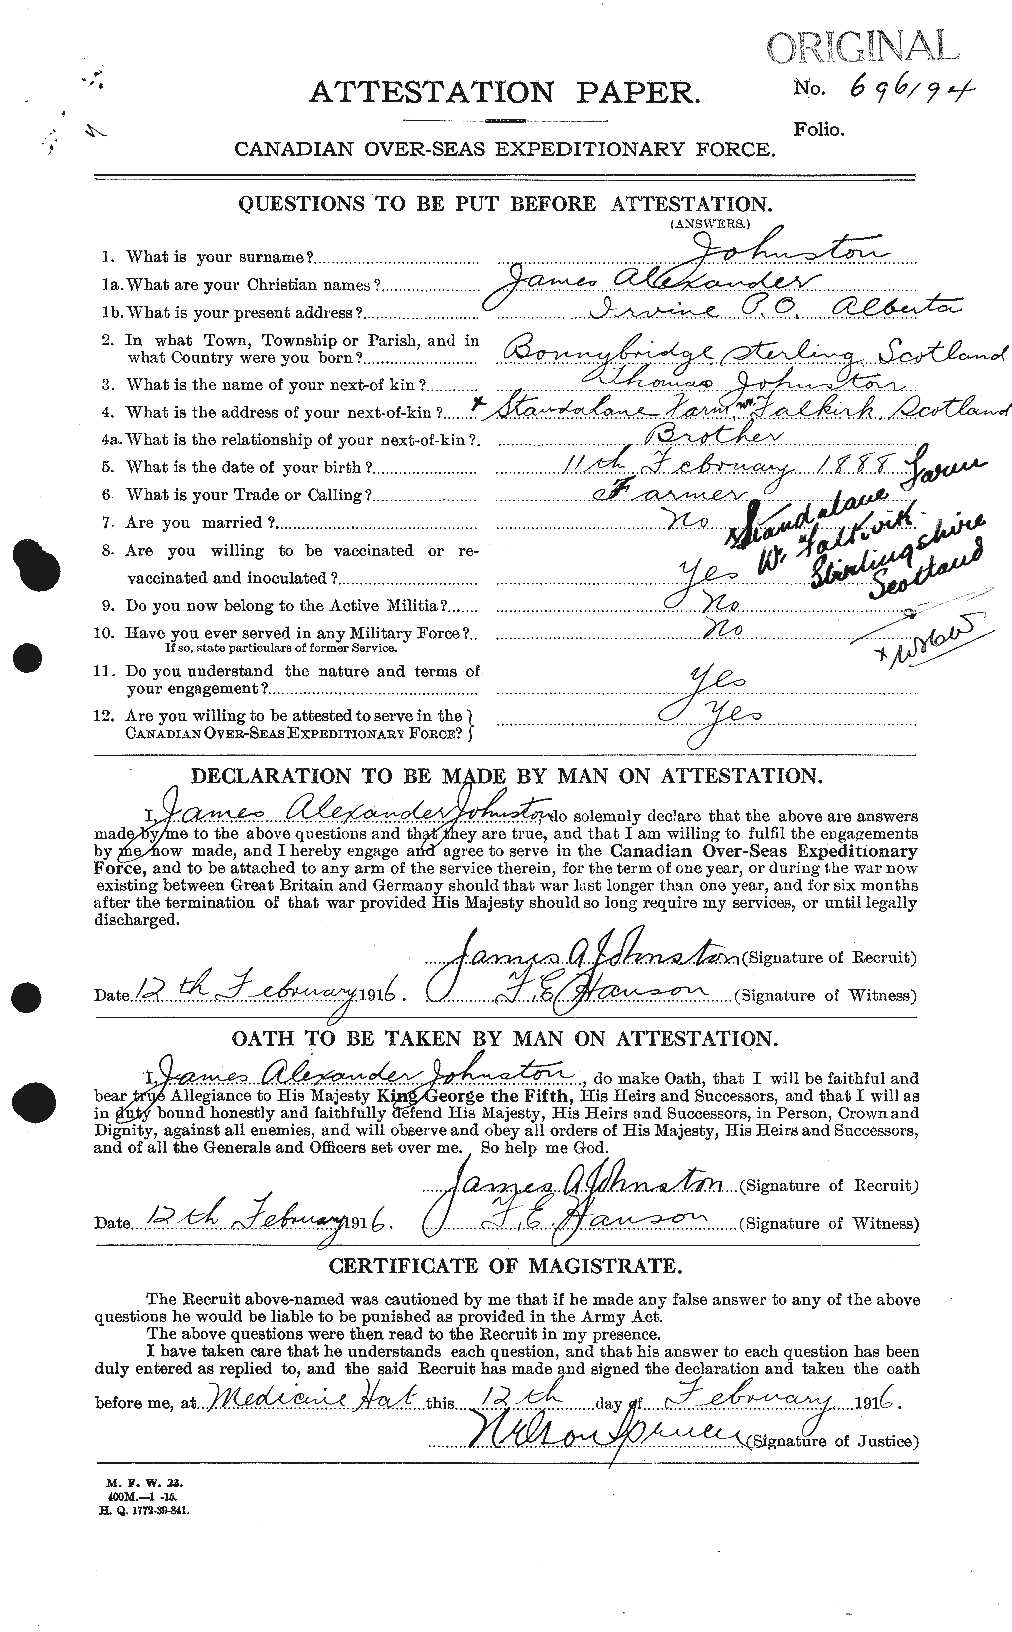 Personnel Records of the First World War - CEF 422718a